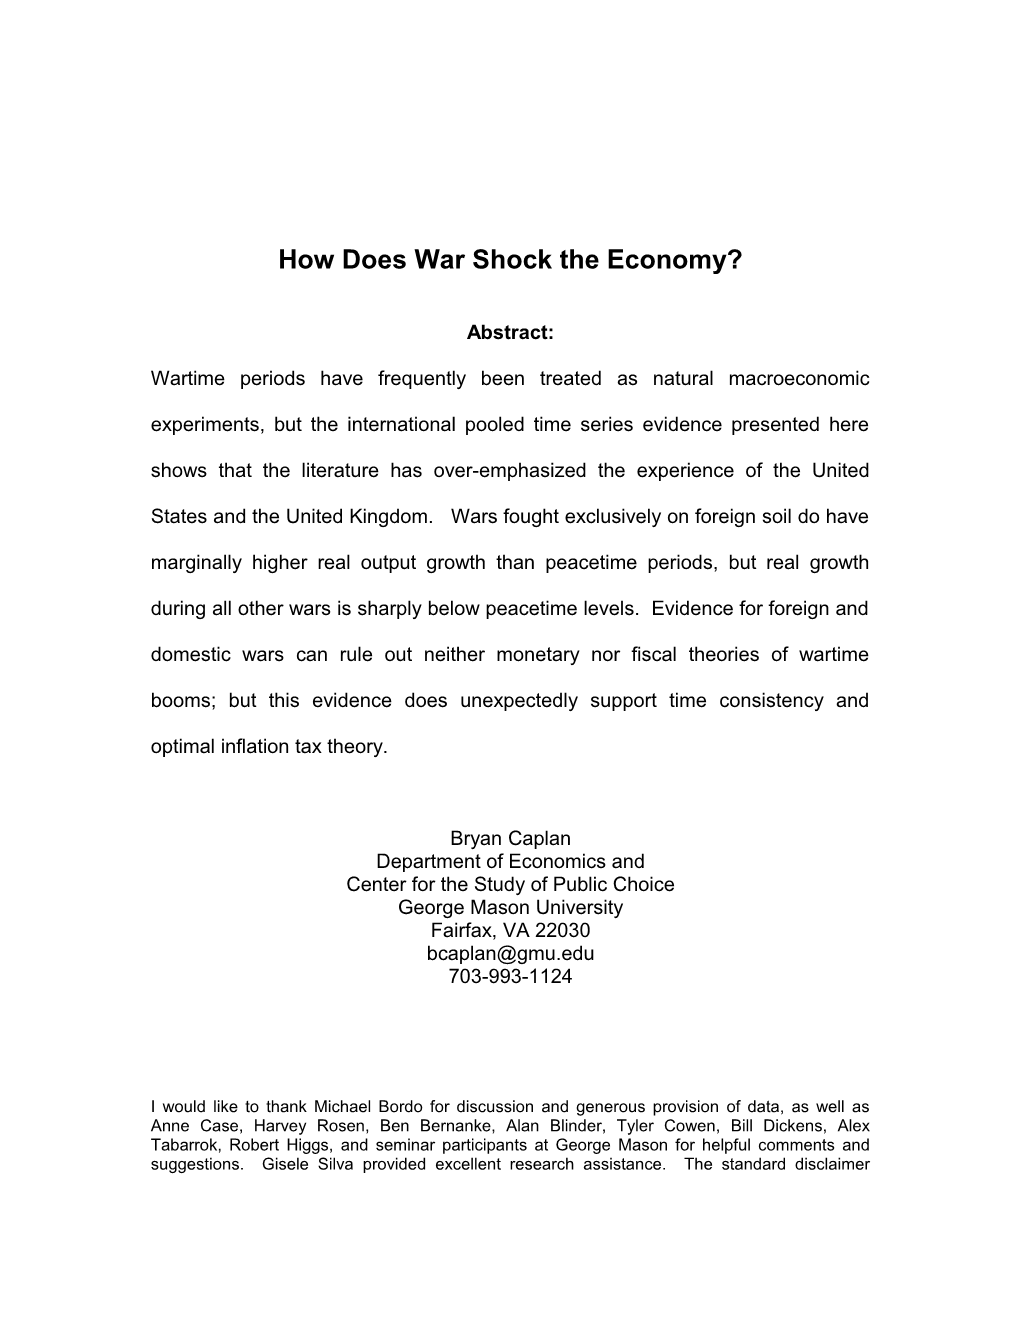 Macroeconomic Policy During Wartime